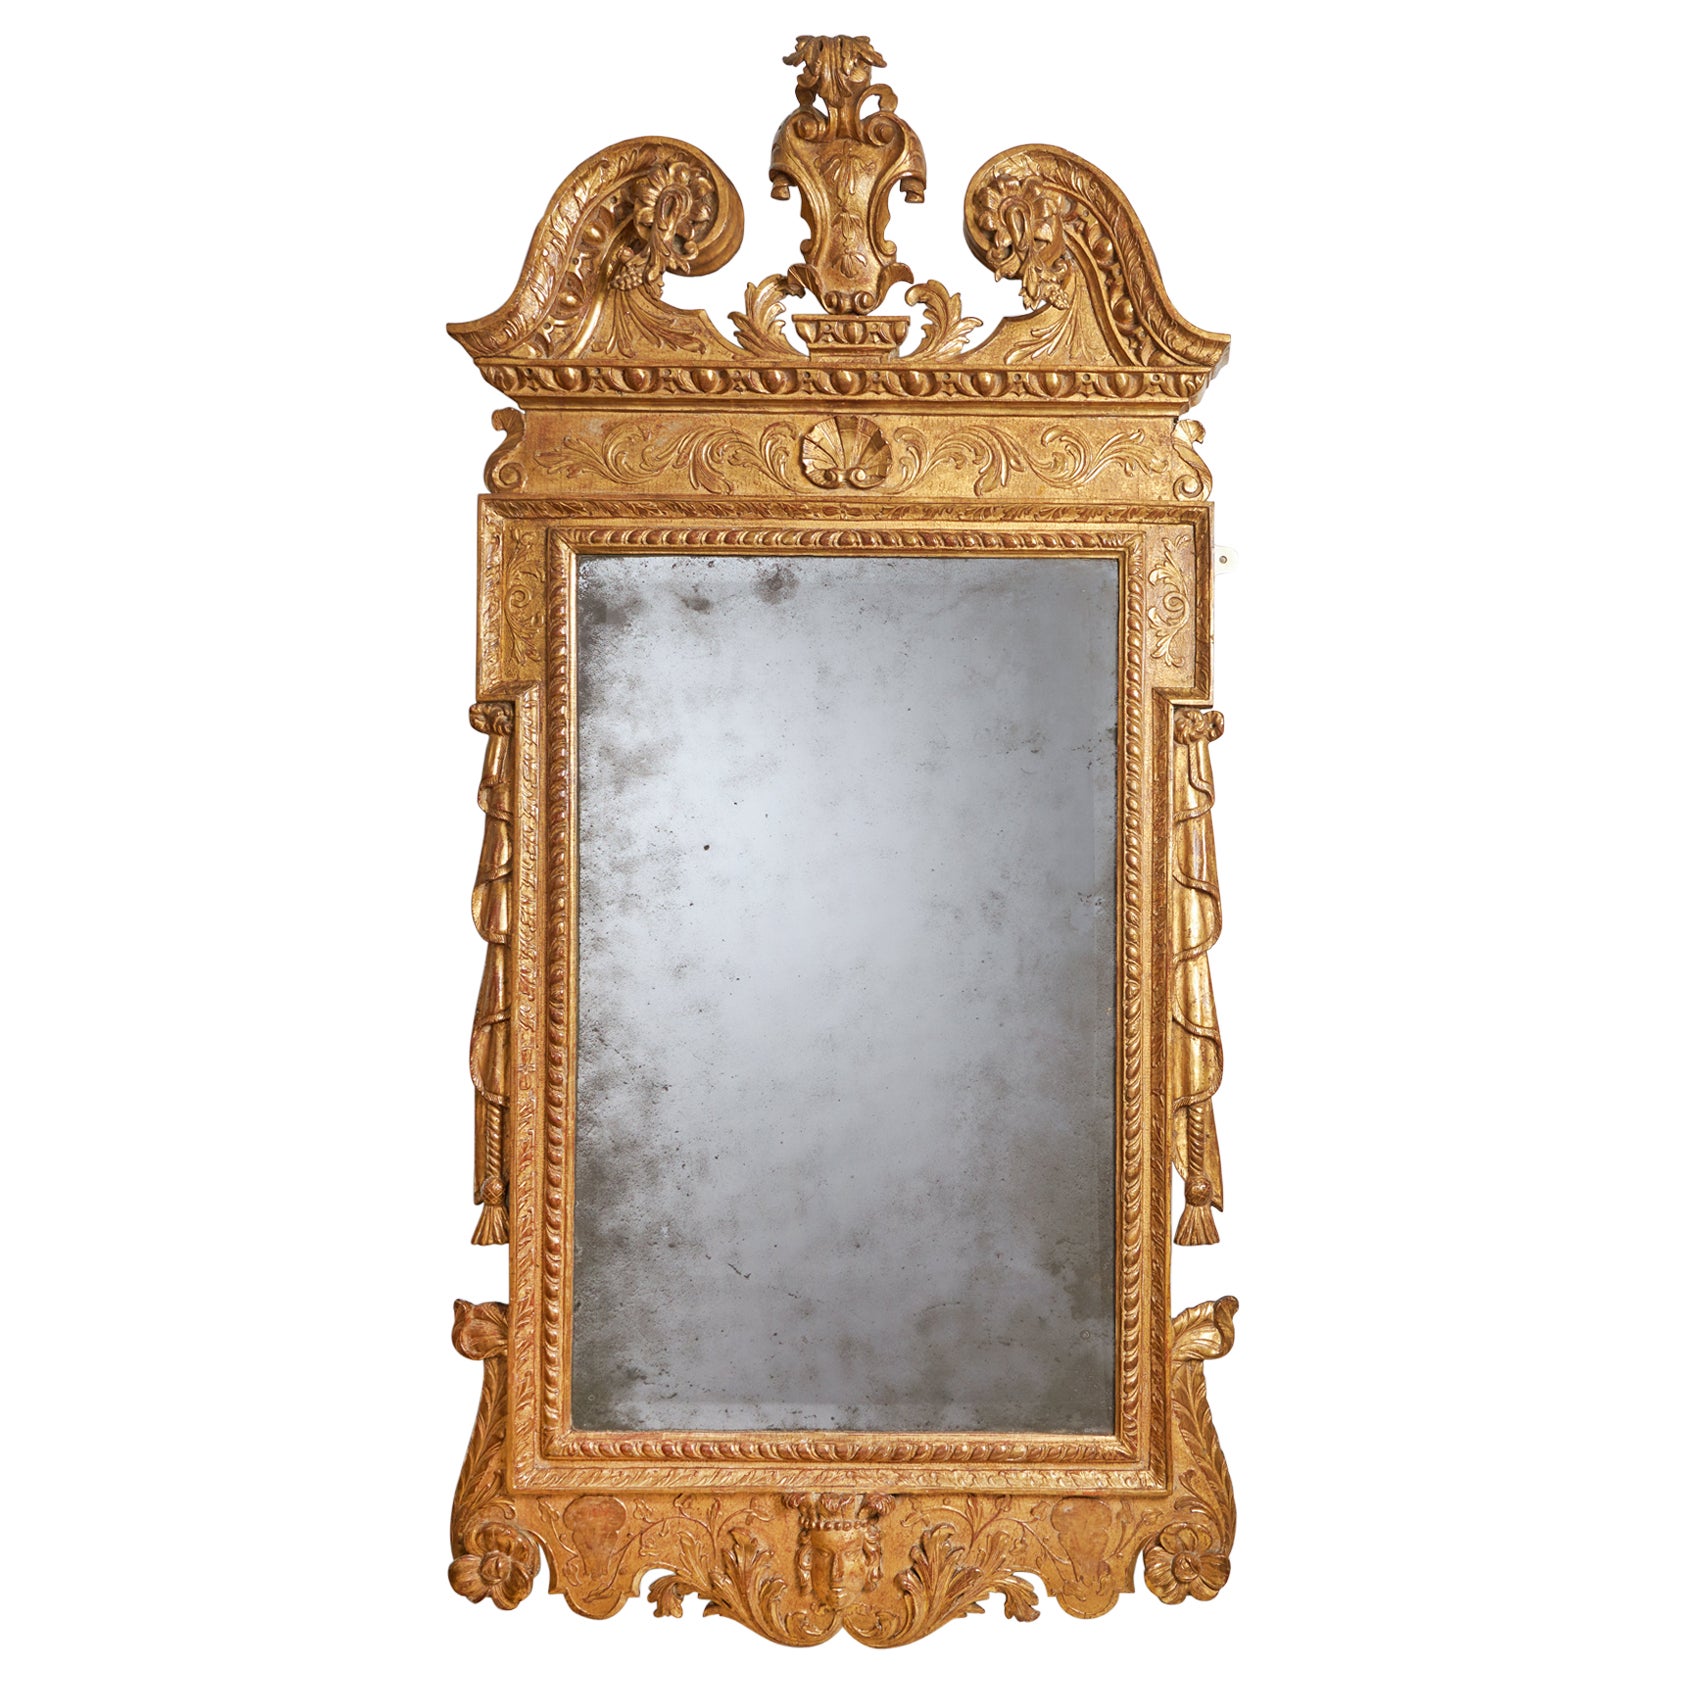 A Rare 18th Century George II Carved Cut Gesso and Giltwood Mirror, Circa 1730 For Sale